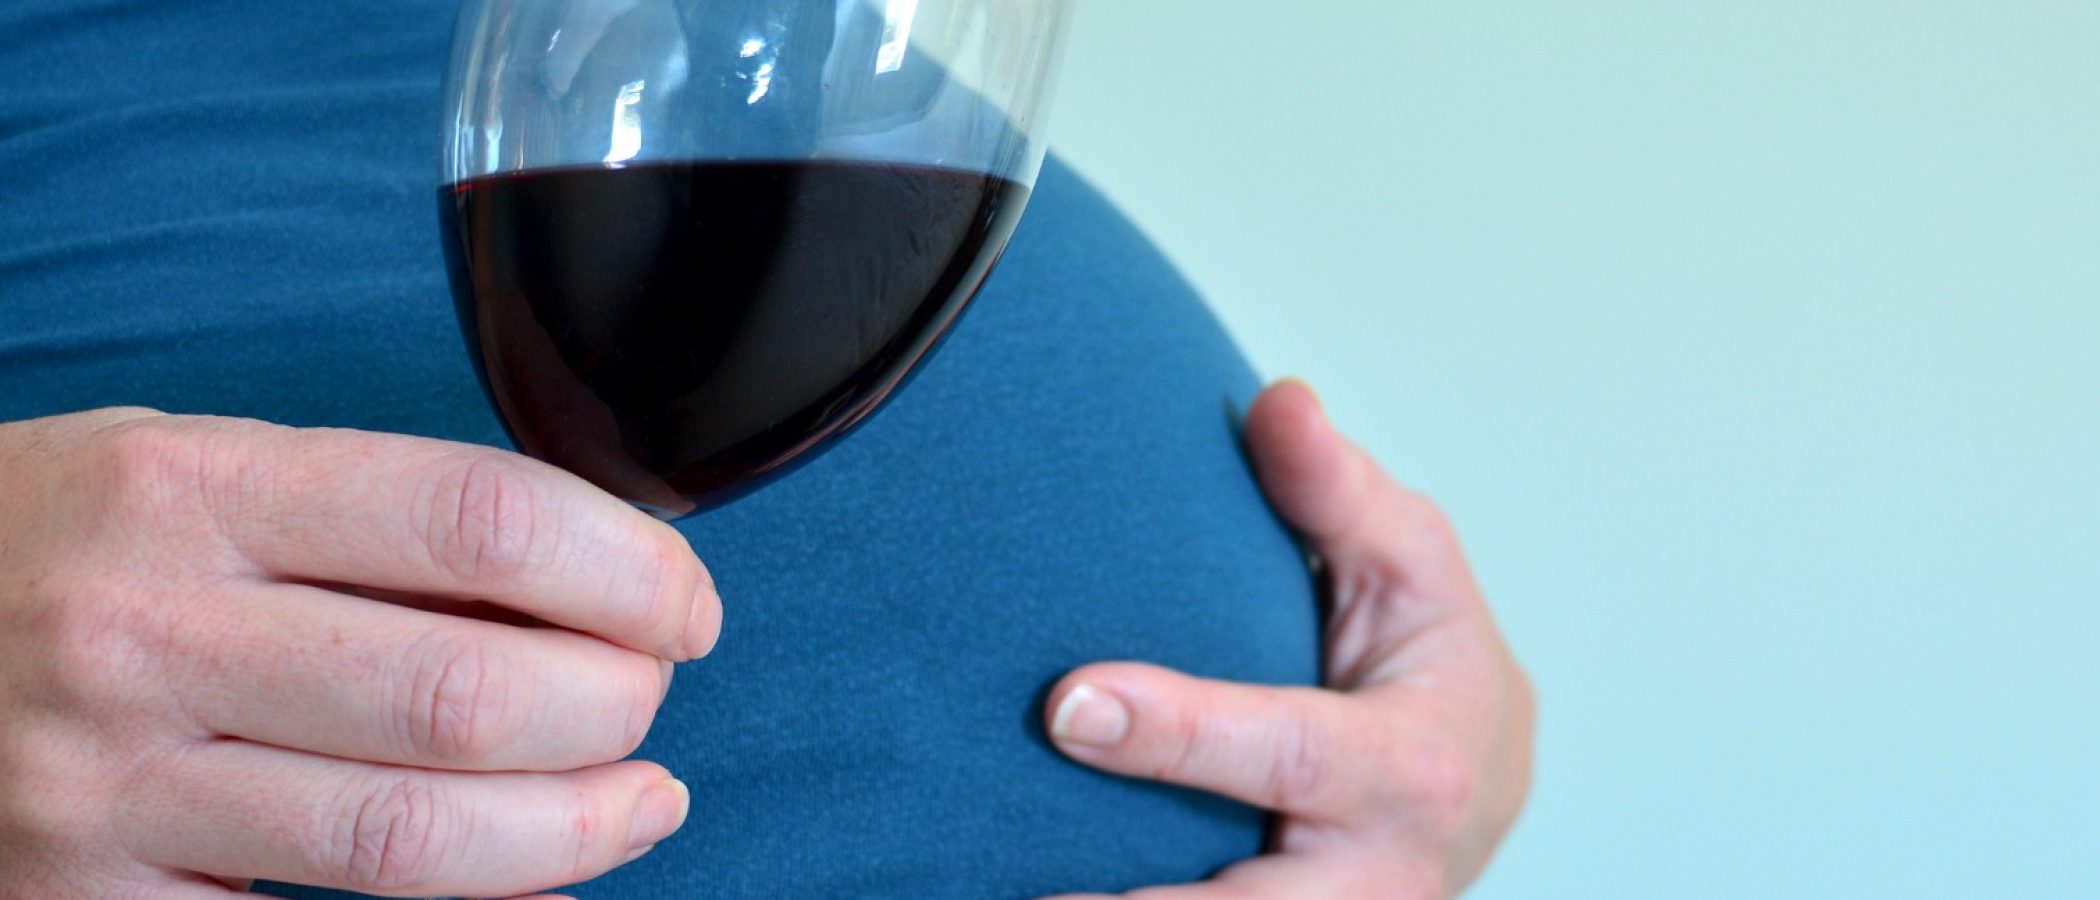 close up of pregnant woman’s belly, while she is holding a glass of red wine - fetal alcohol syndrome